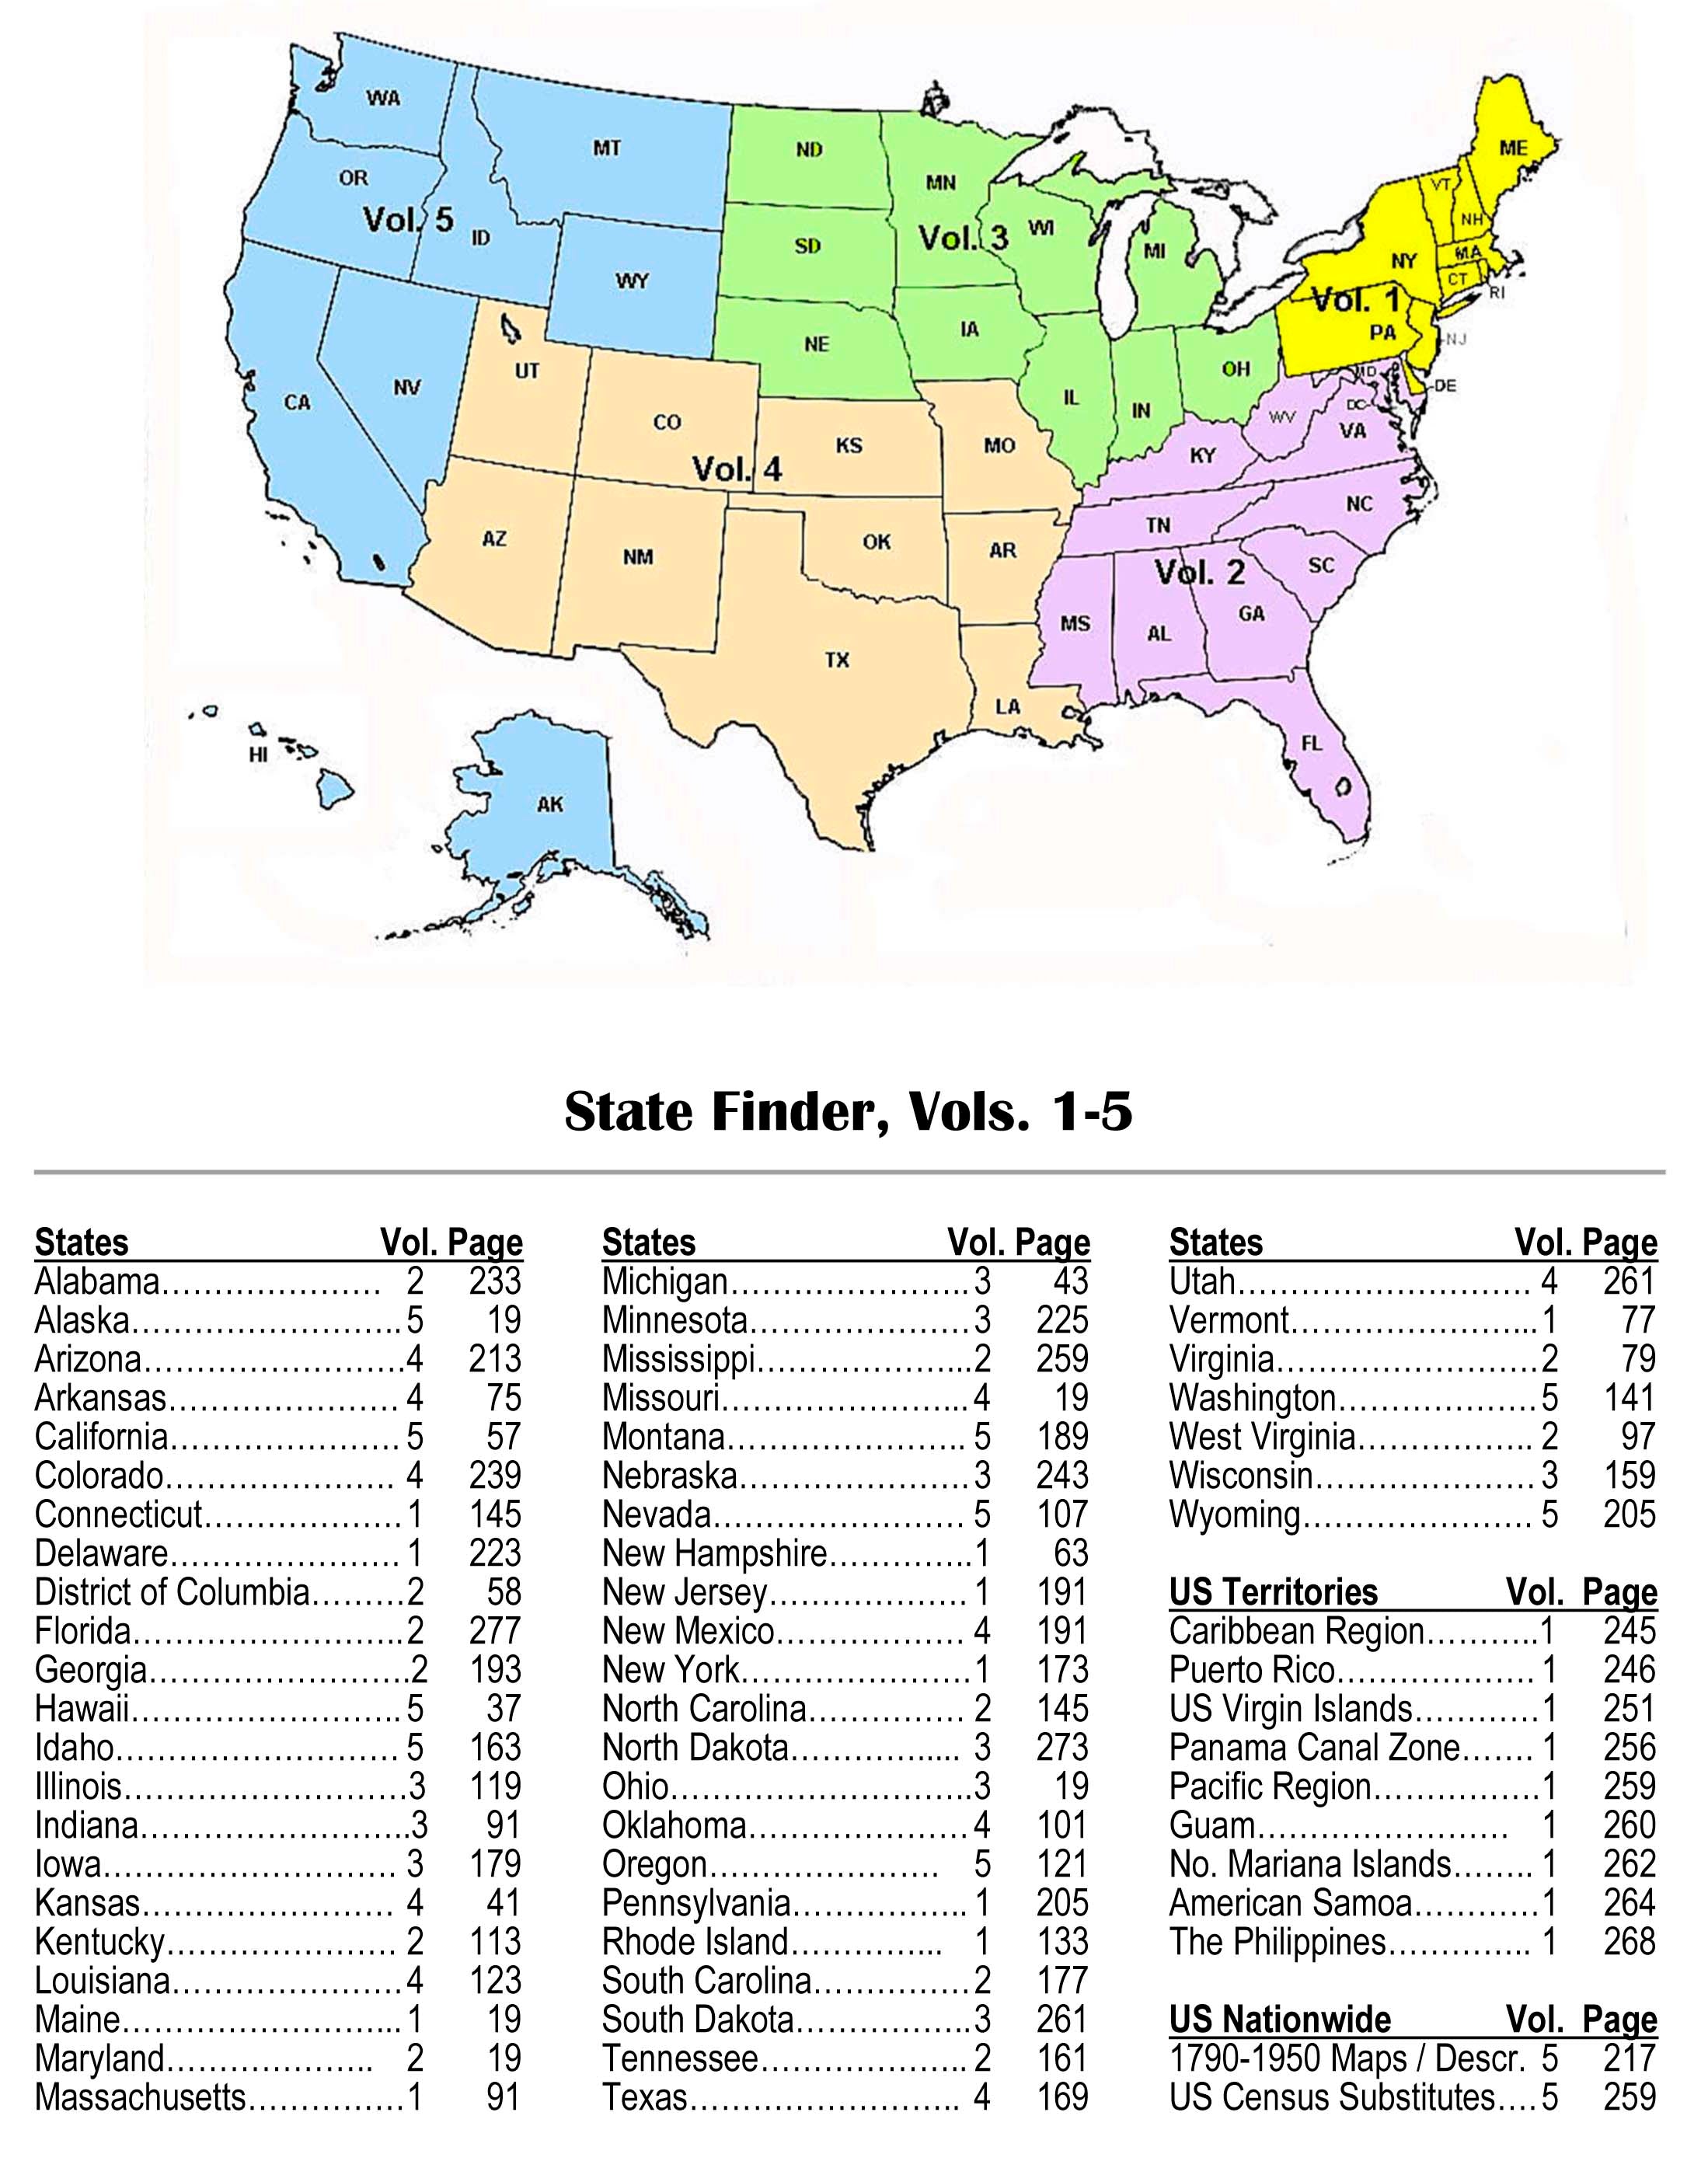 Census Substitutes & State Census Records, Third Edition, Volume 3 - Northcentral States (BUNDLE: Printed Book & PDF eBook)